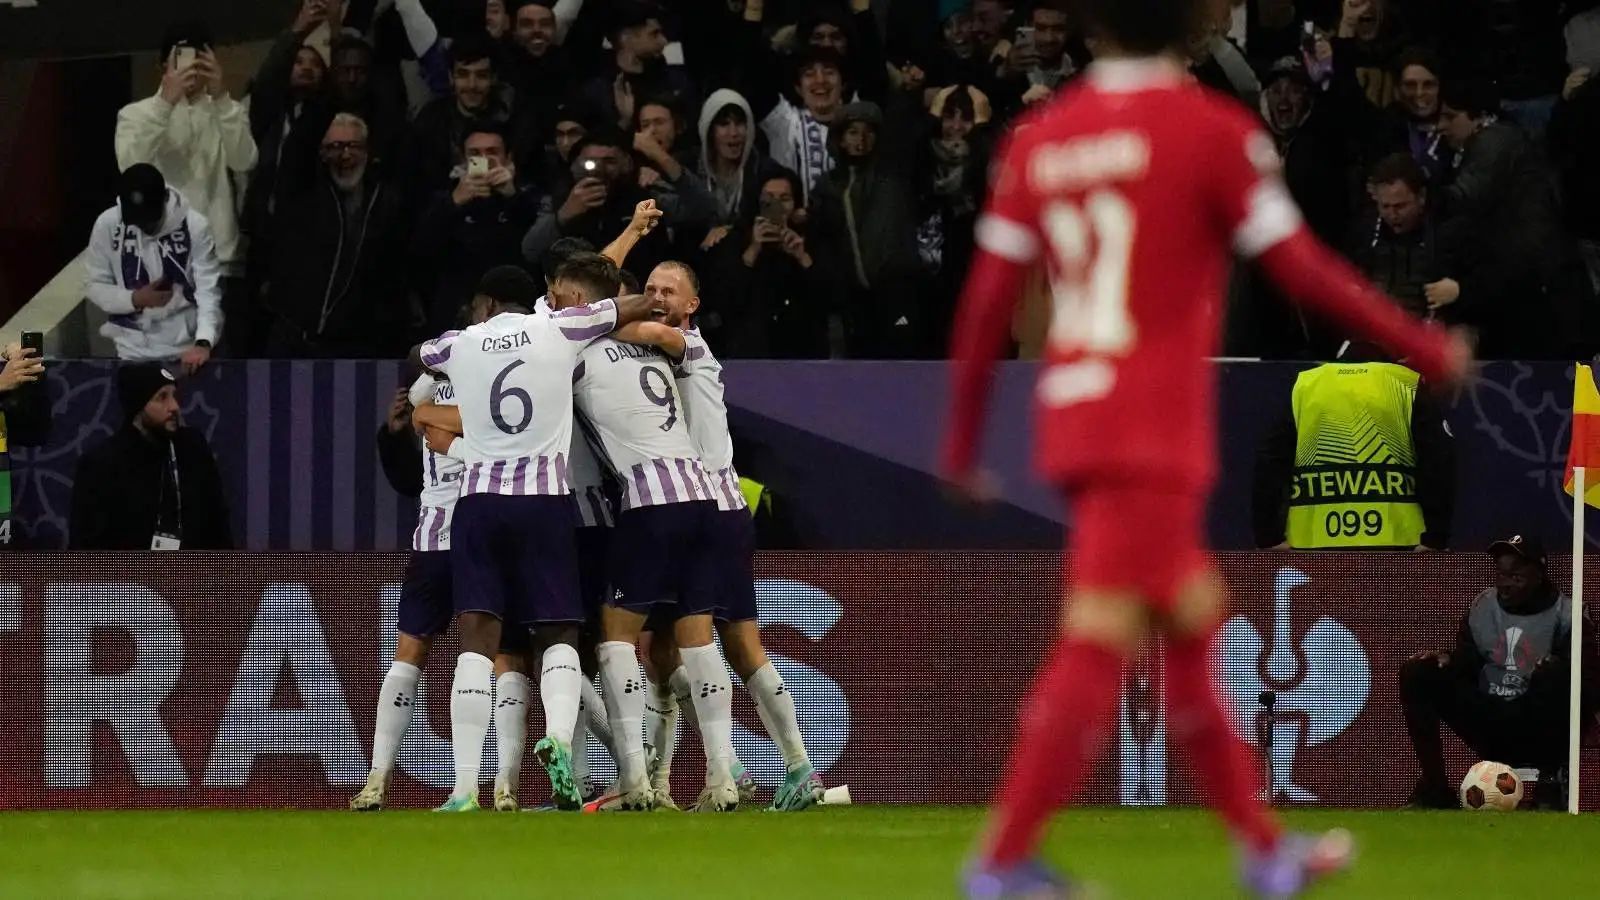 Can Toulouse follow up their win over Liverpool with another victory this weekend?